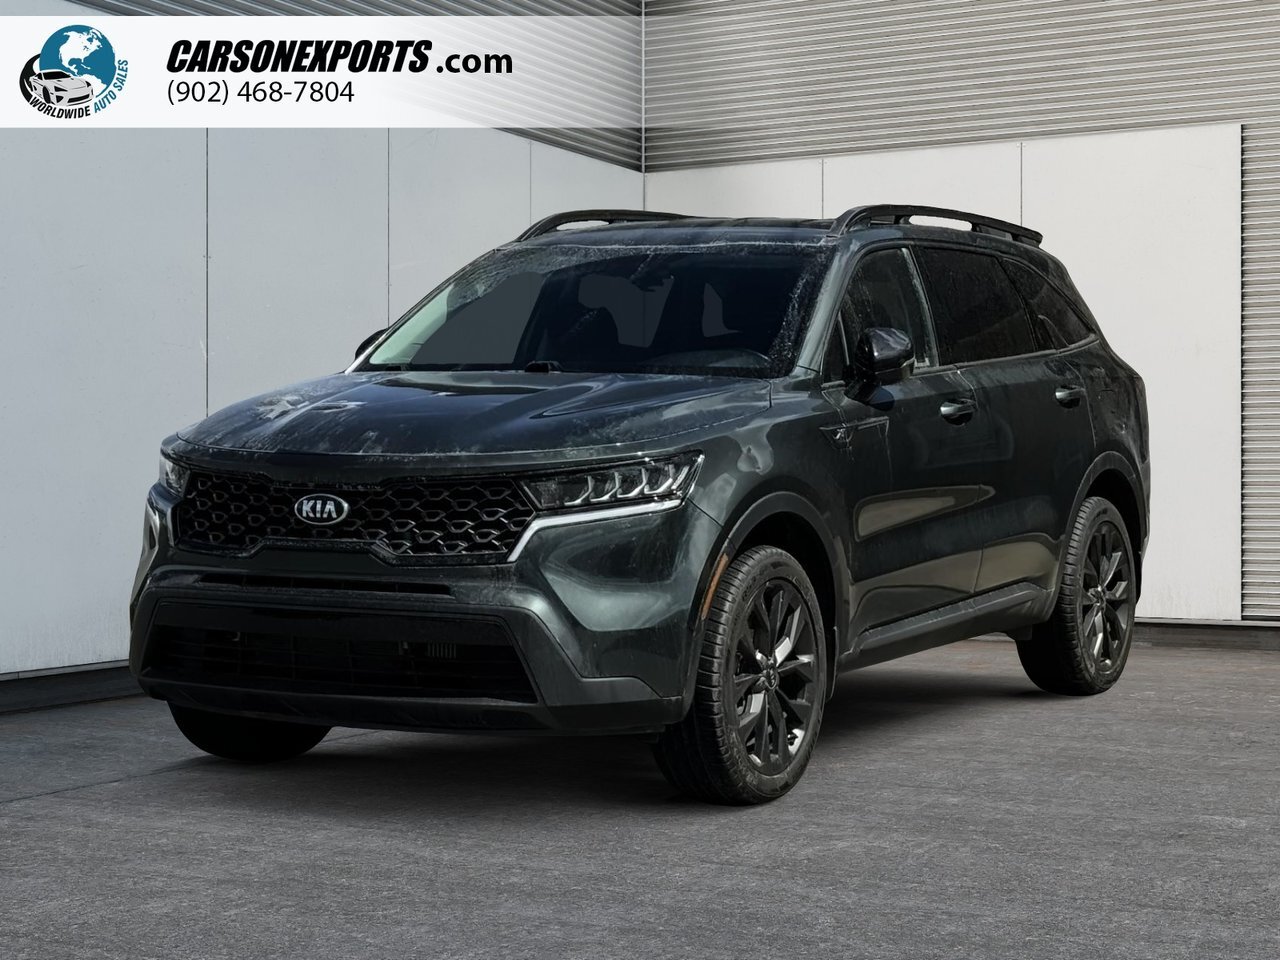 2021 Kia Sorento X-Line The best place to buy a used car. Period.